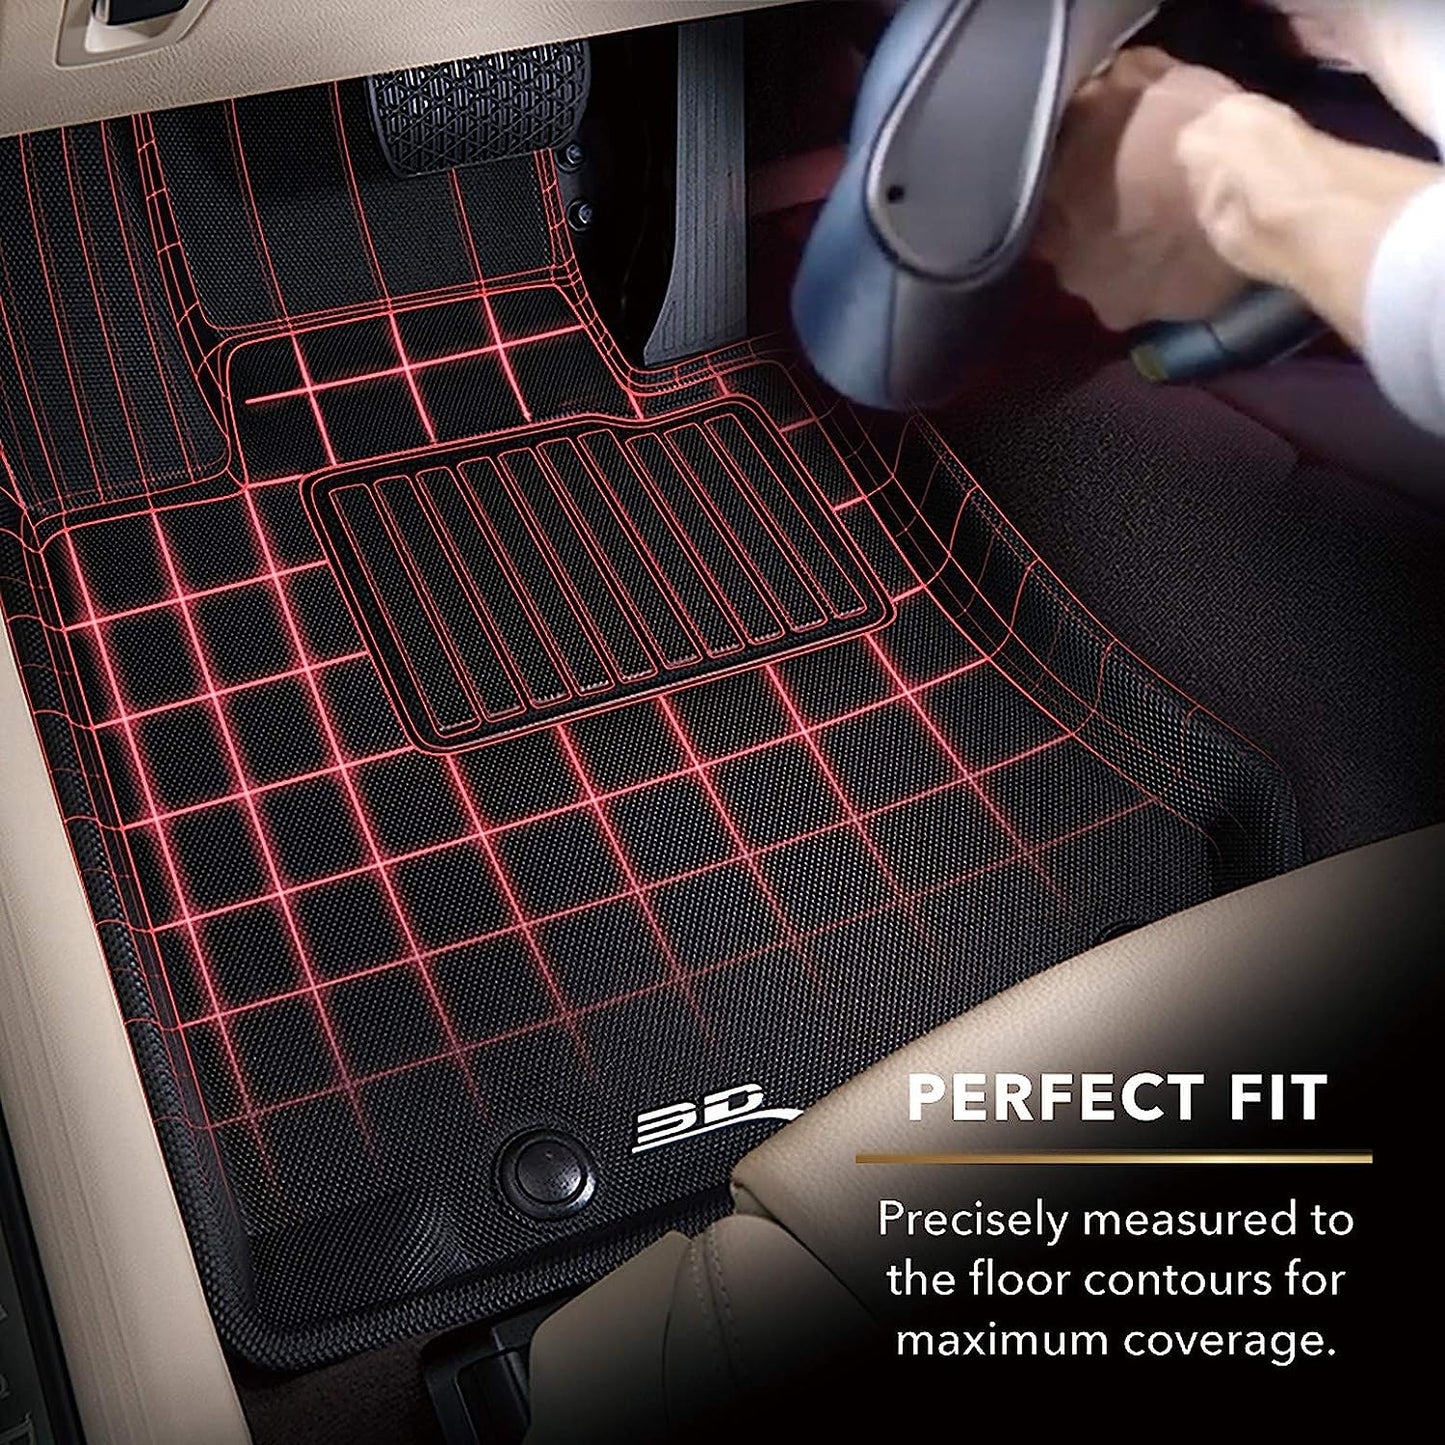 3D MAXpider Custom Fit Floor Liner Black for 2020-2023 HYUNDAI PALISADE Fits 8 Seaters All 3 Rows